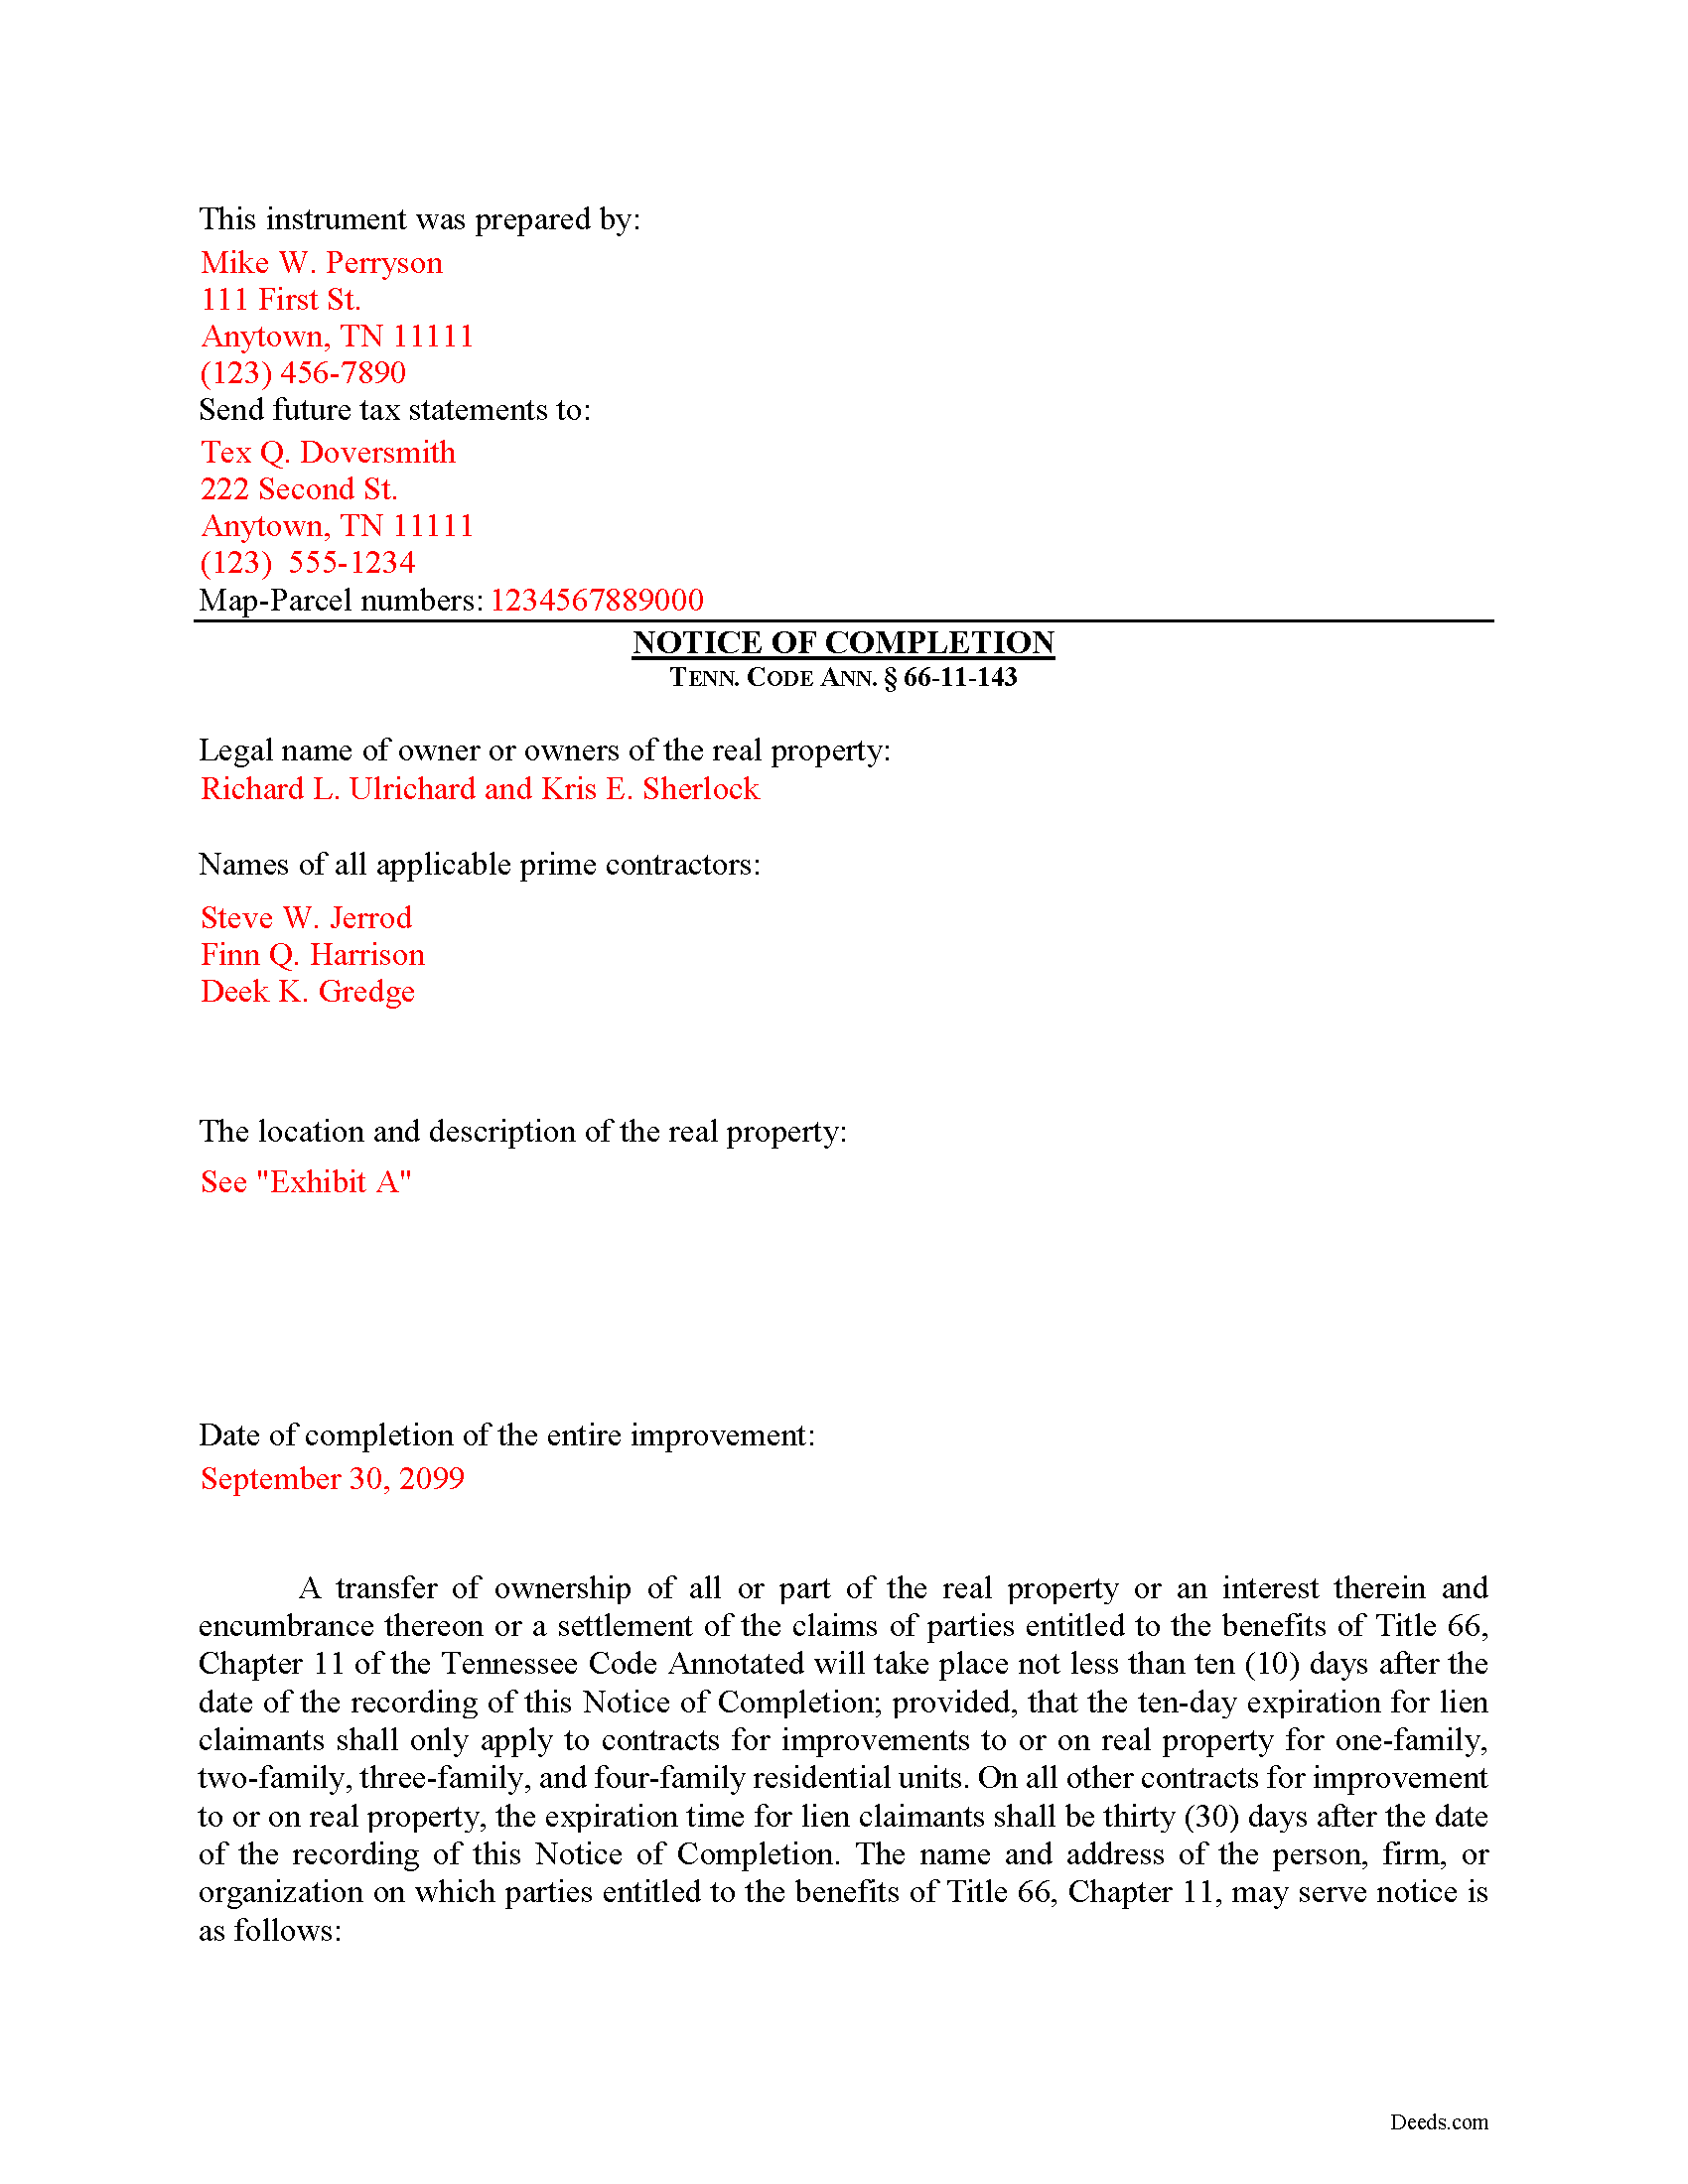 Completed Example of the Notice of Completion Document